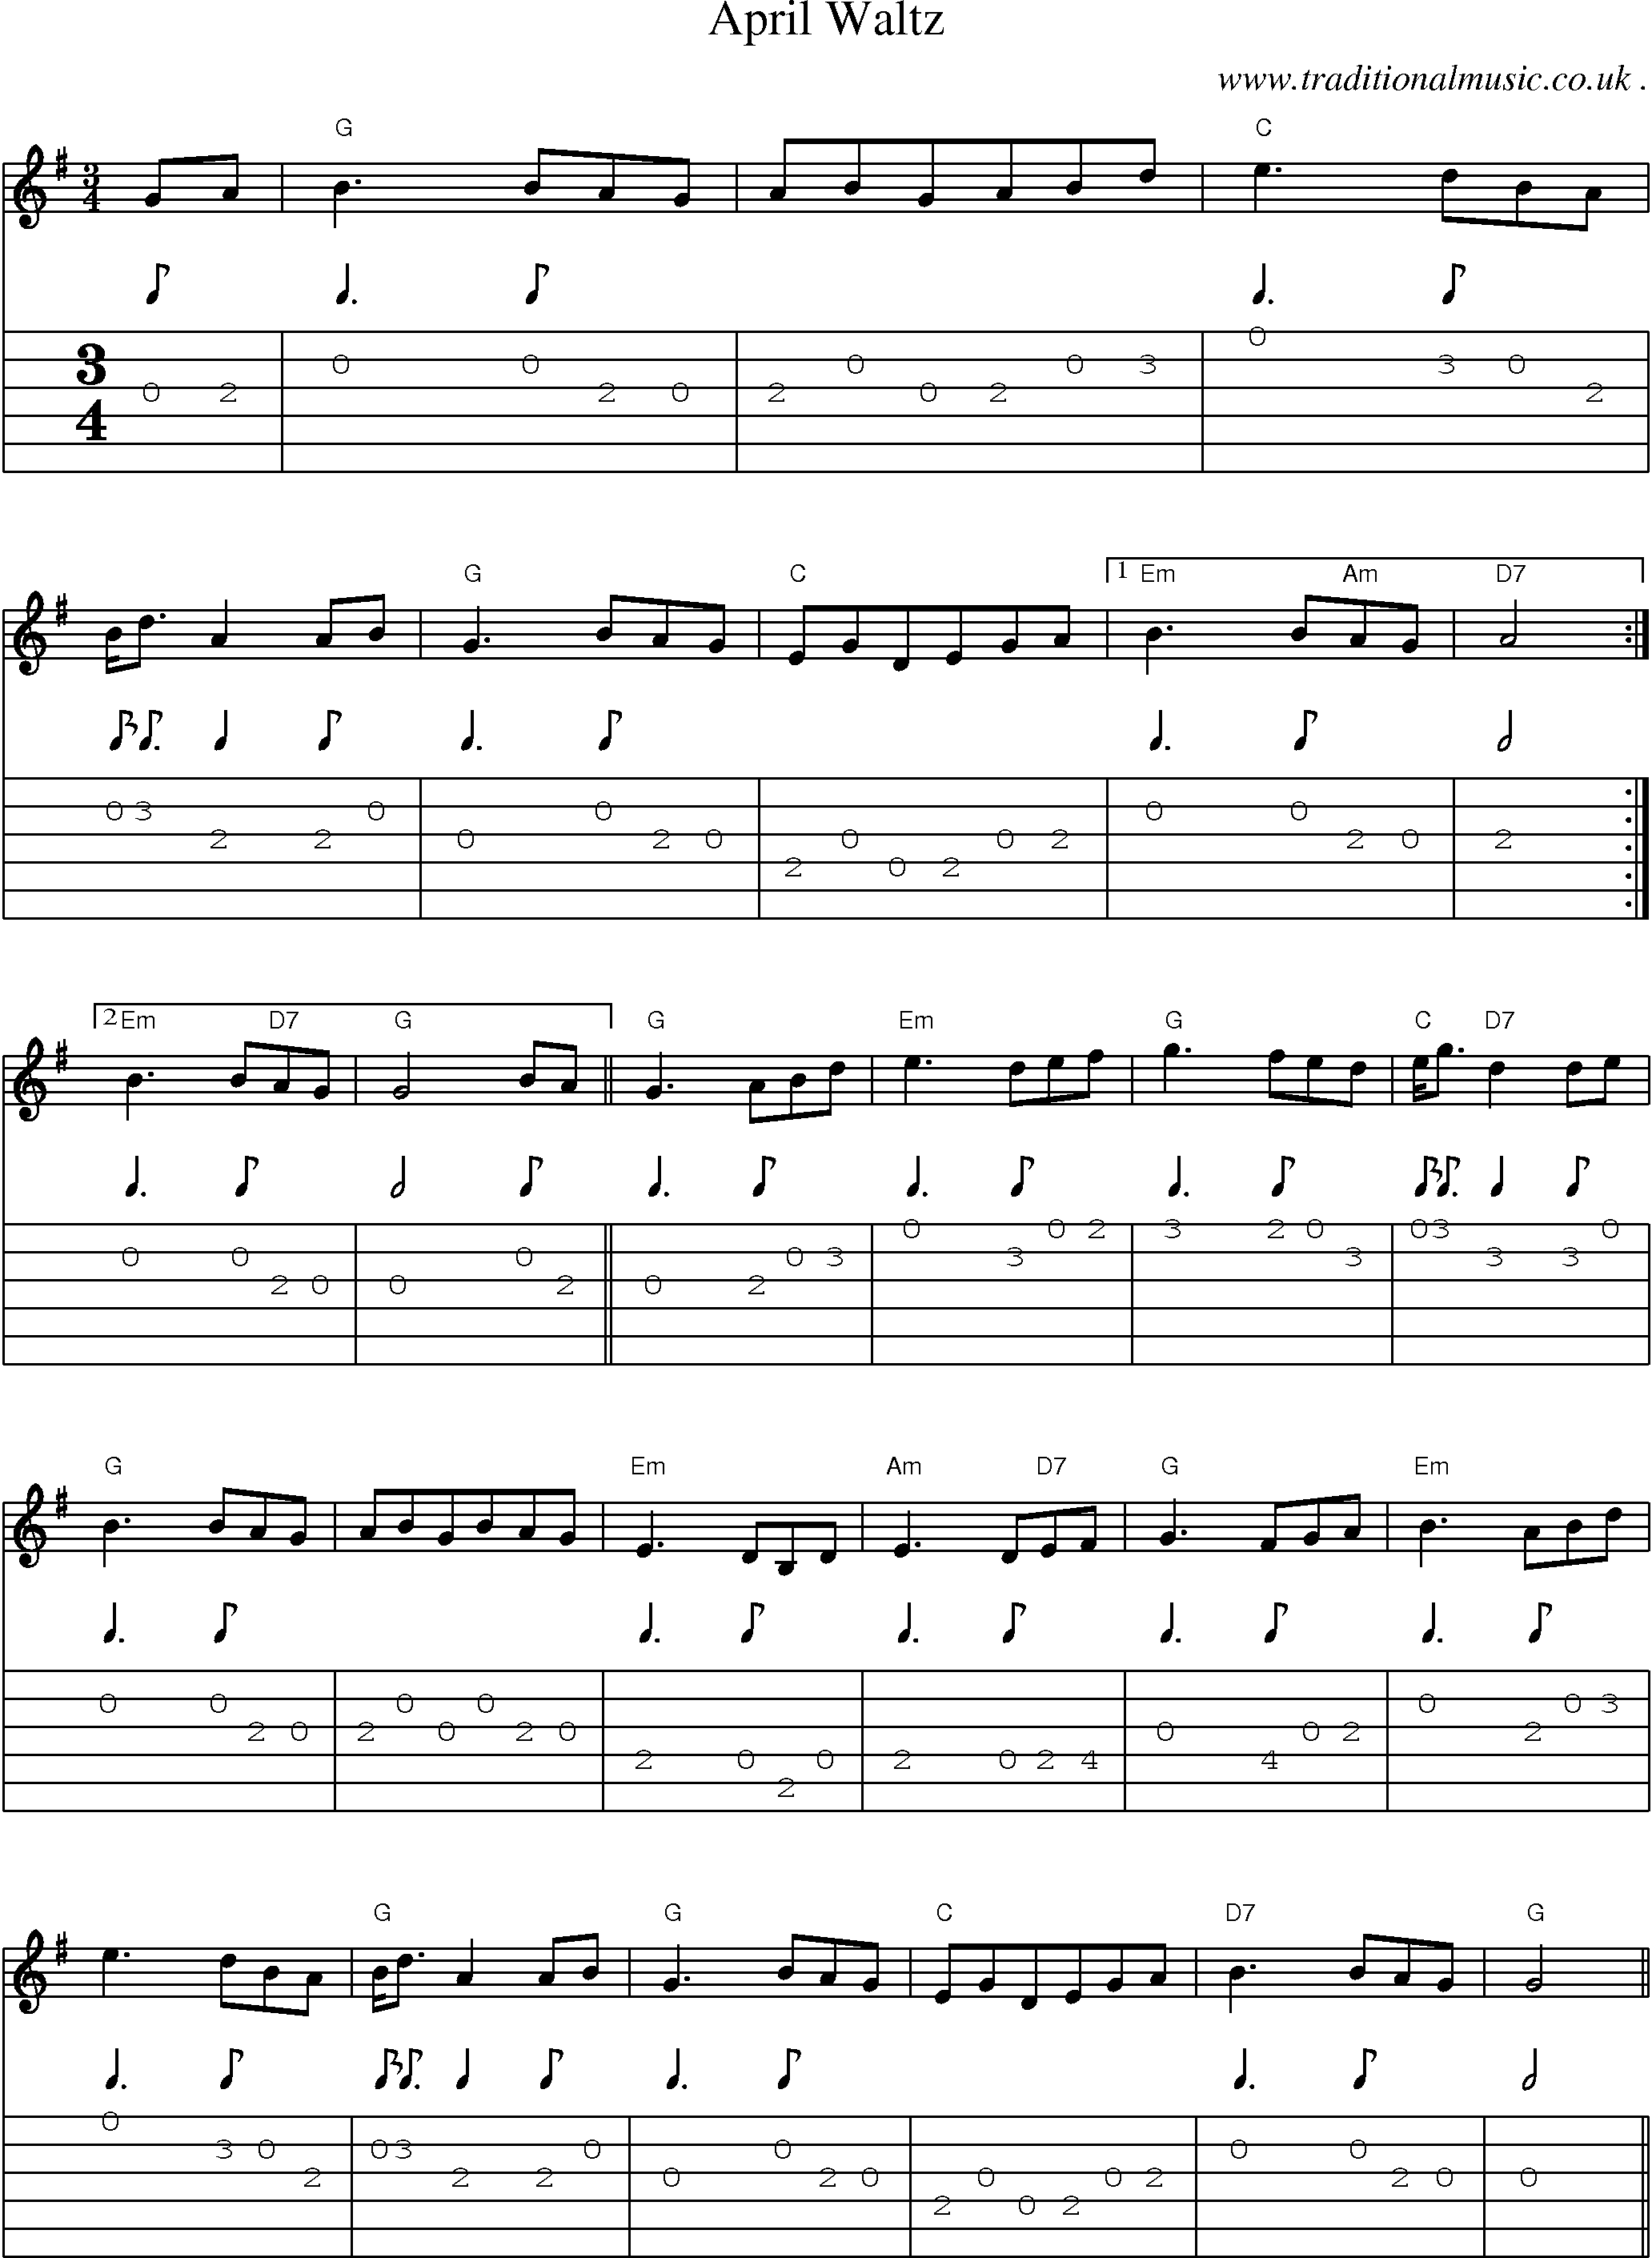 Sheet-Music and Guitar Tabs for April Waltz